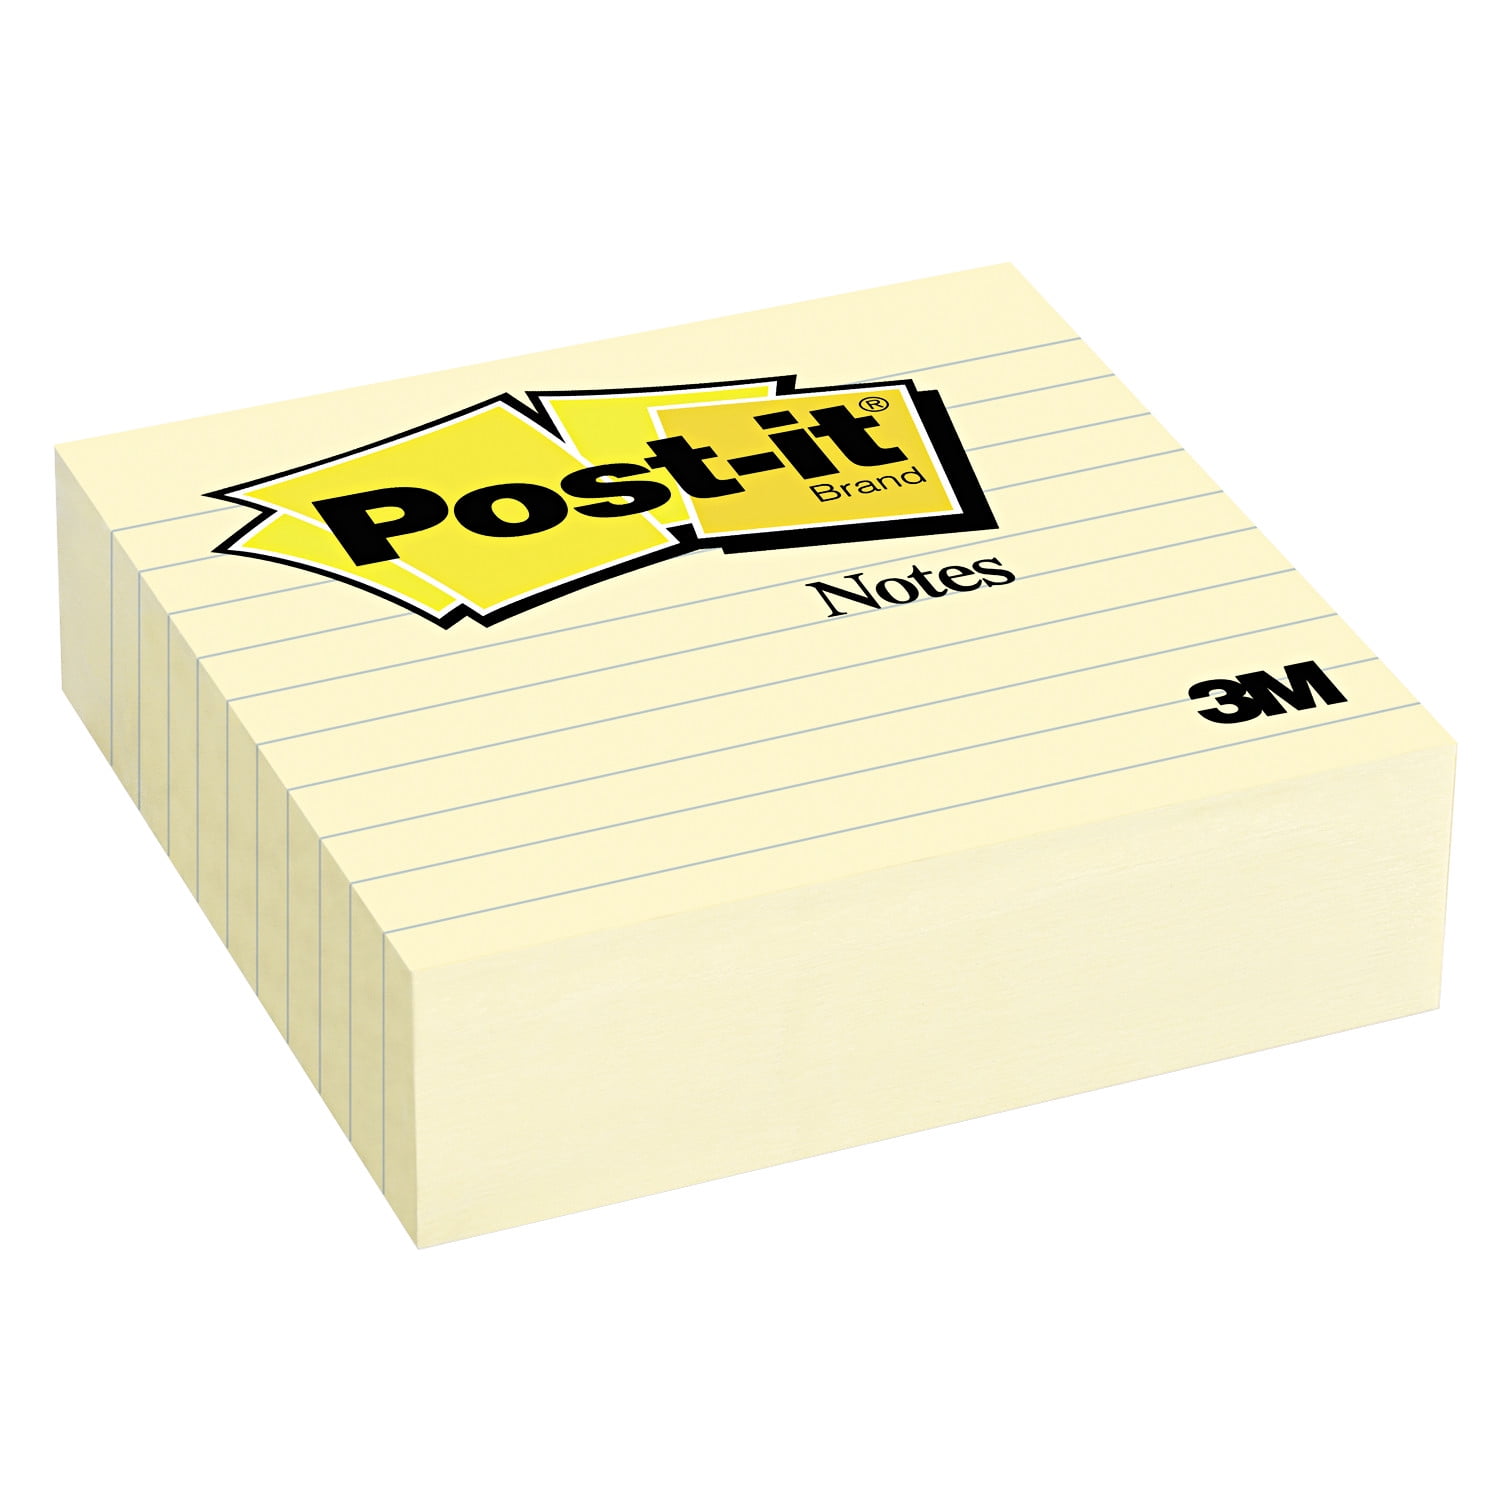 2 7/8in x 4 7/8in 12-Pads/Pack Canary Yellow Post-it Notes